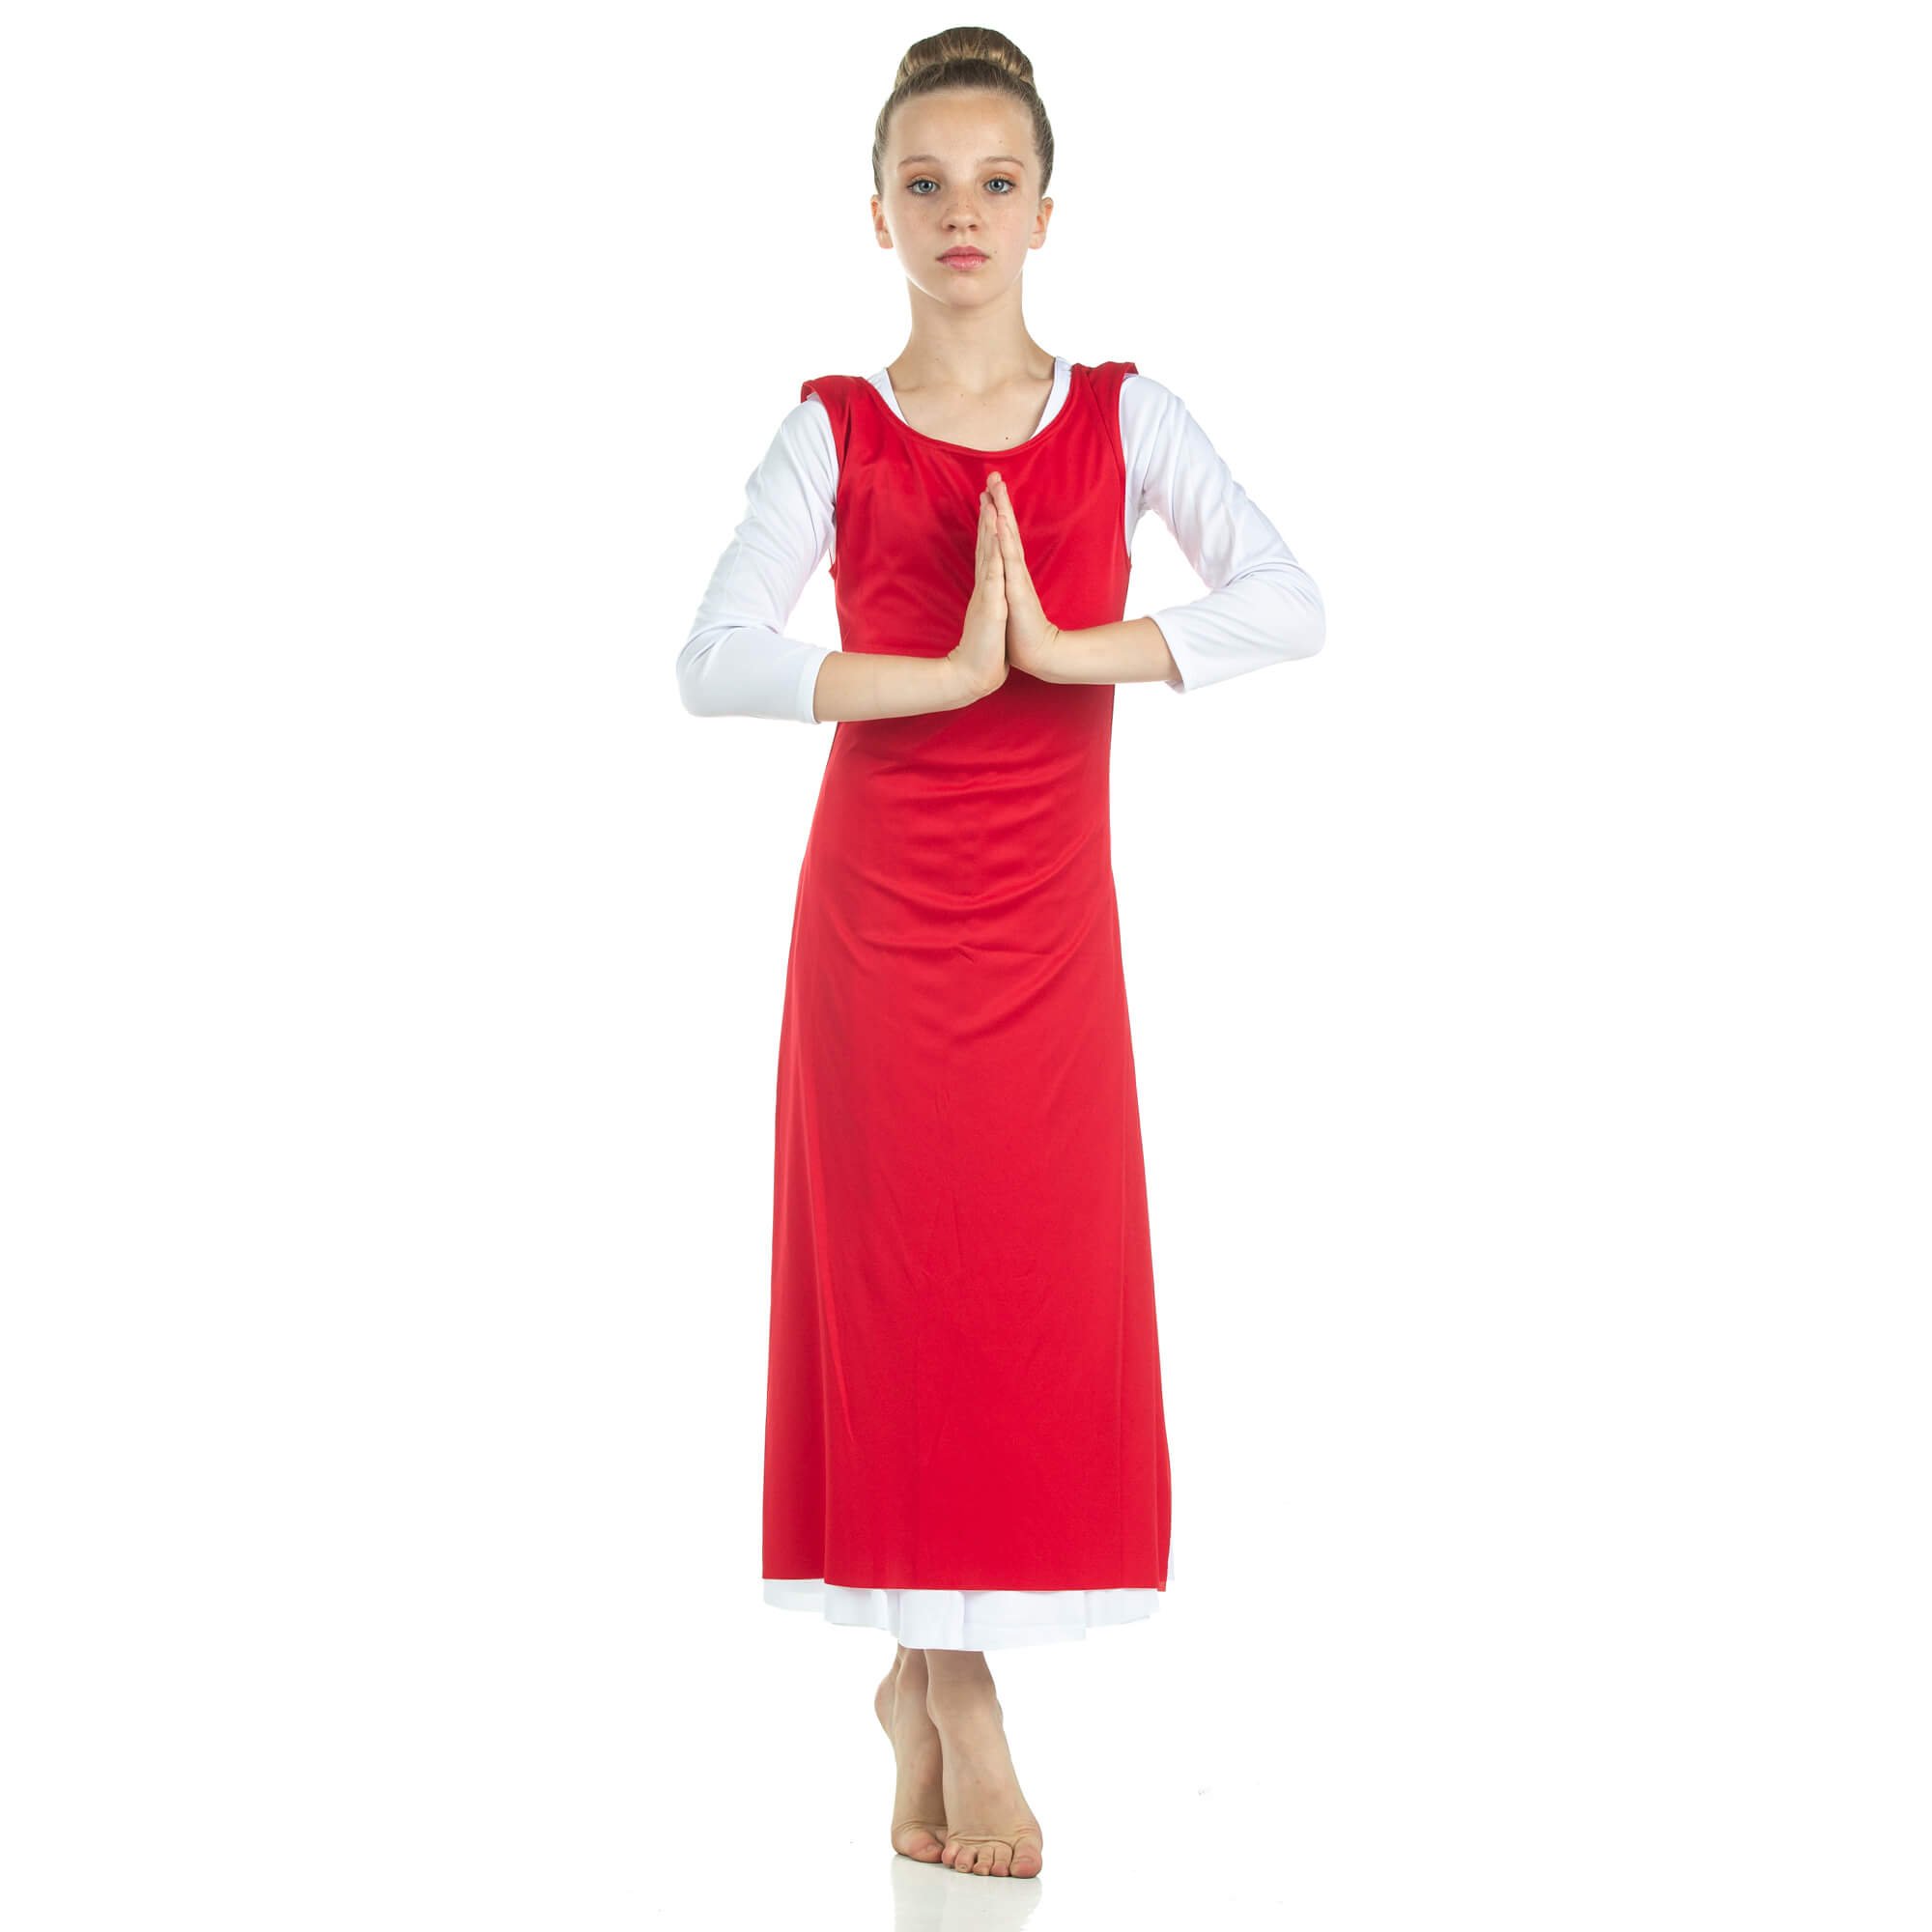 Child Worship Dance Tunic with Side Slits (white dress not included) - Click Image to Close